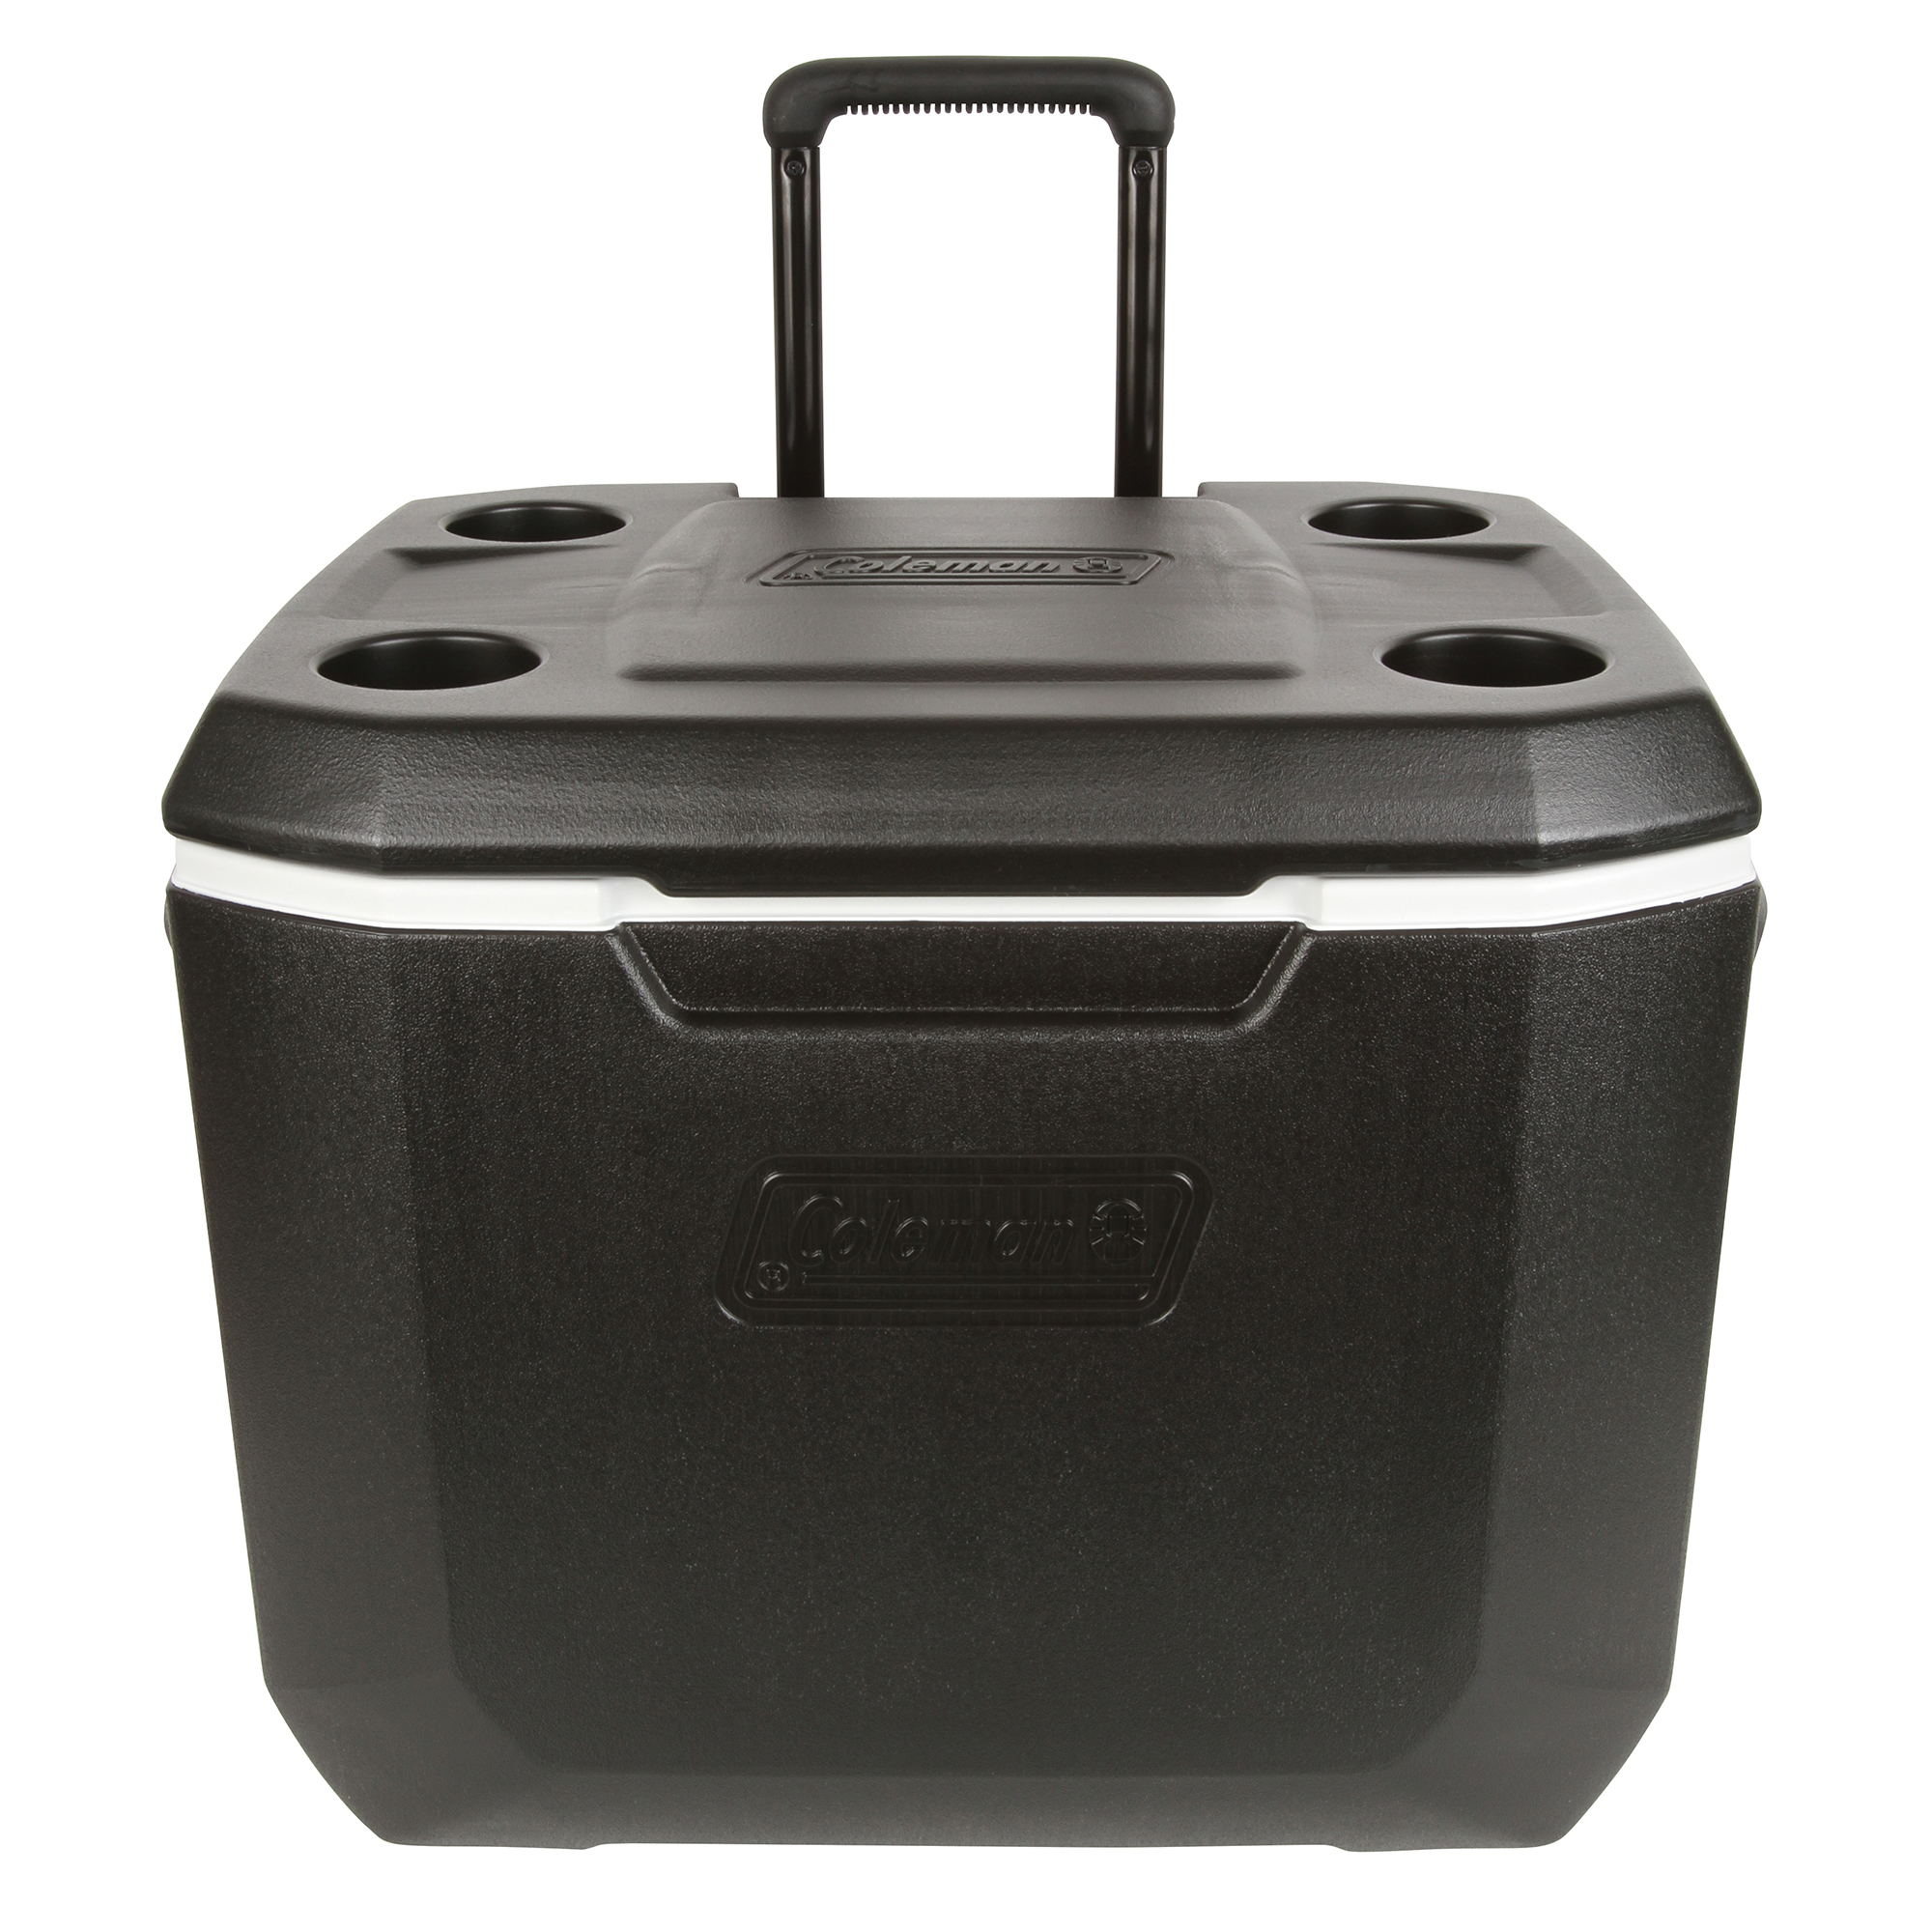 Coleman 50-Quart Xtreme 5-Day Heavy-Duty Hard Cooler with Wheels, Black - image 1 of 3